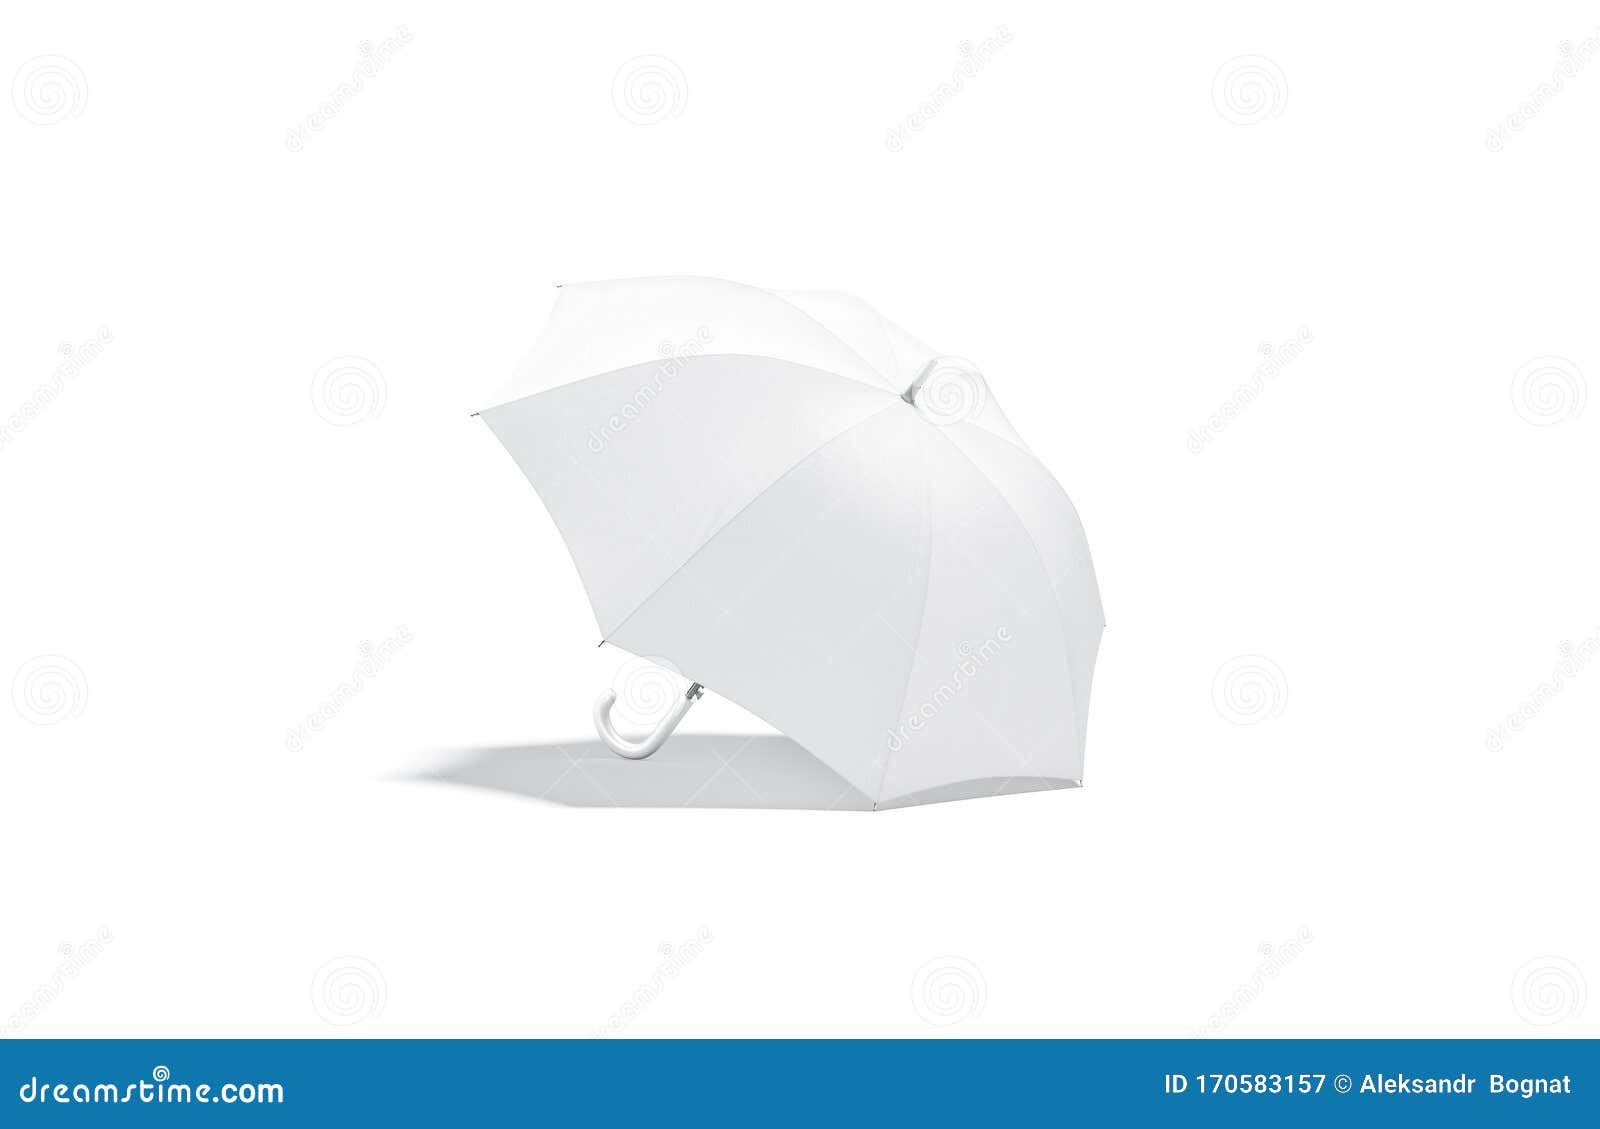 Download Blank White Open Umbrella Mock Up Lying, Side View Stock ...